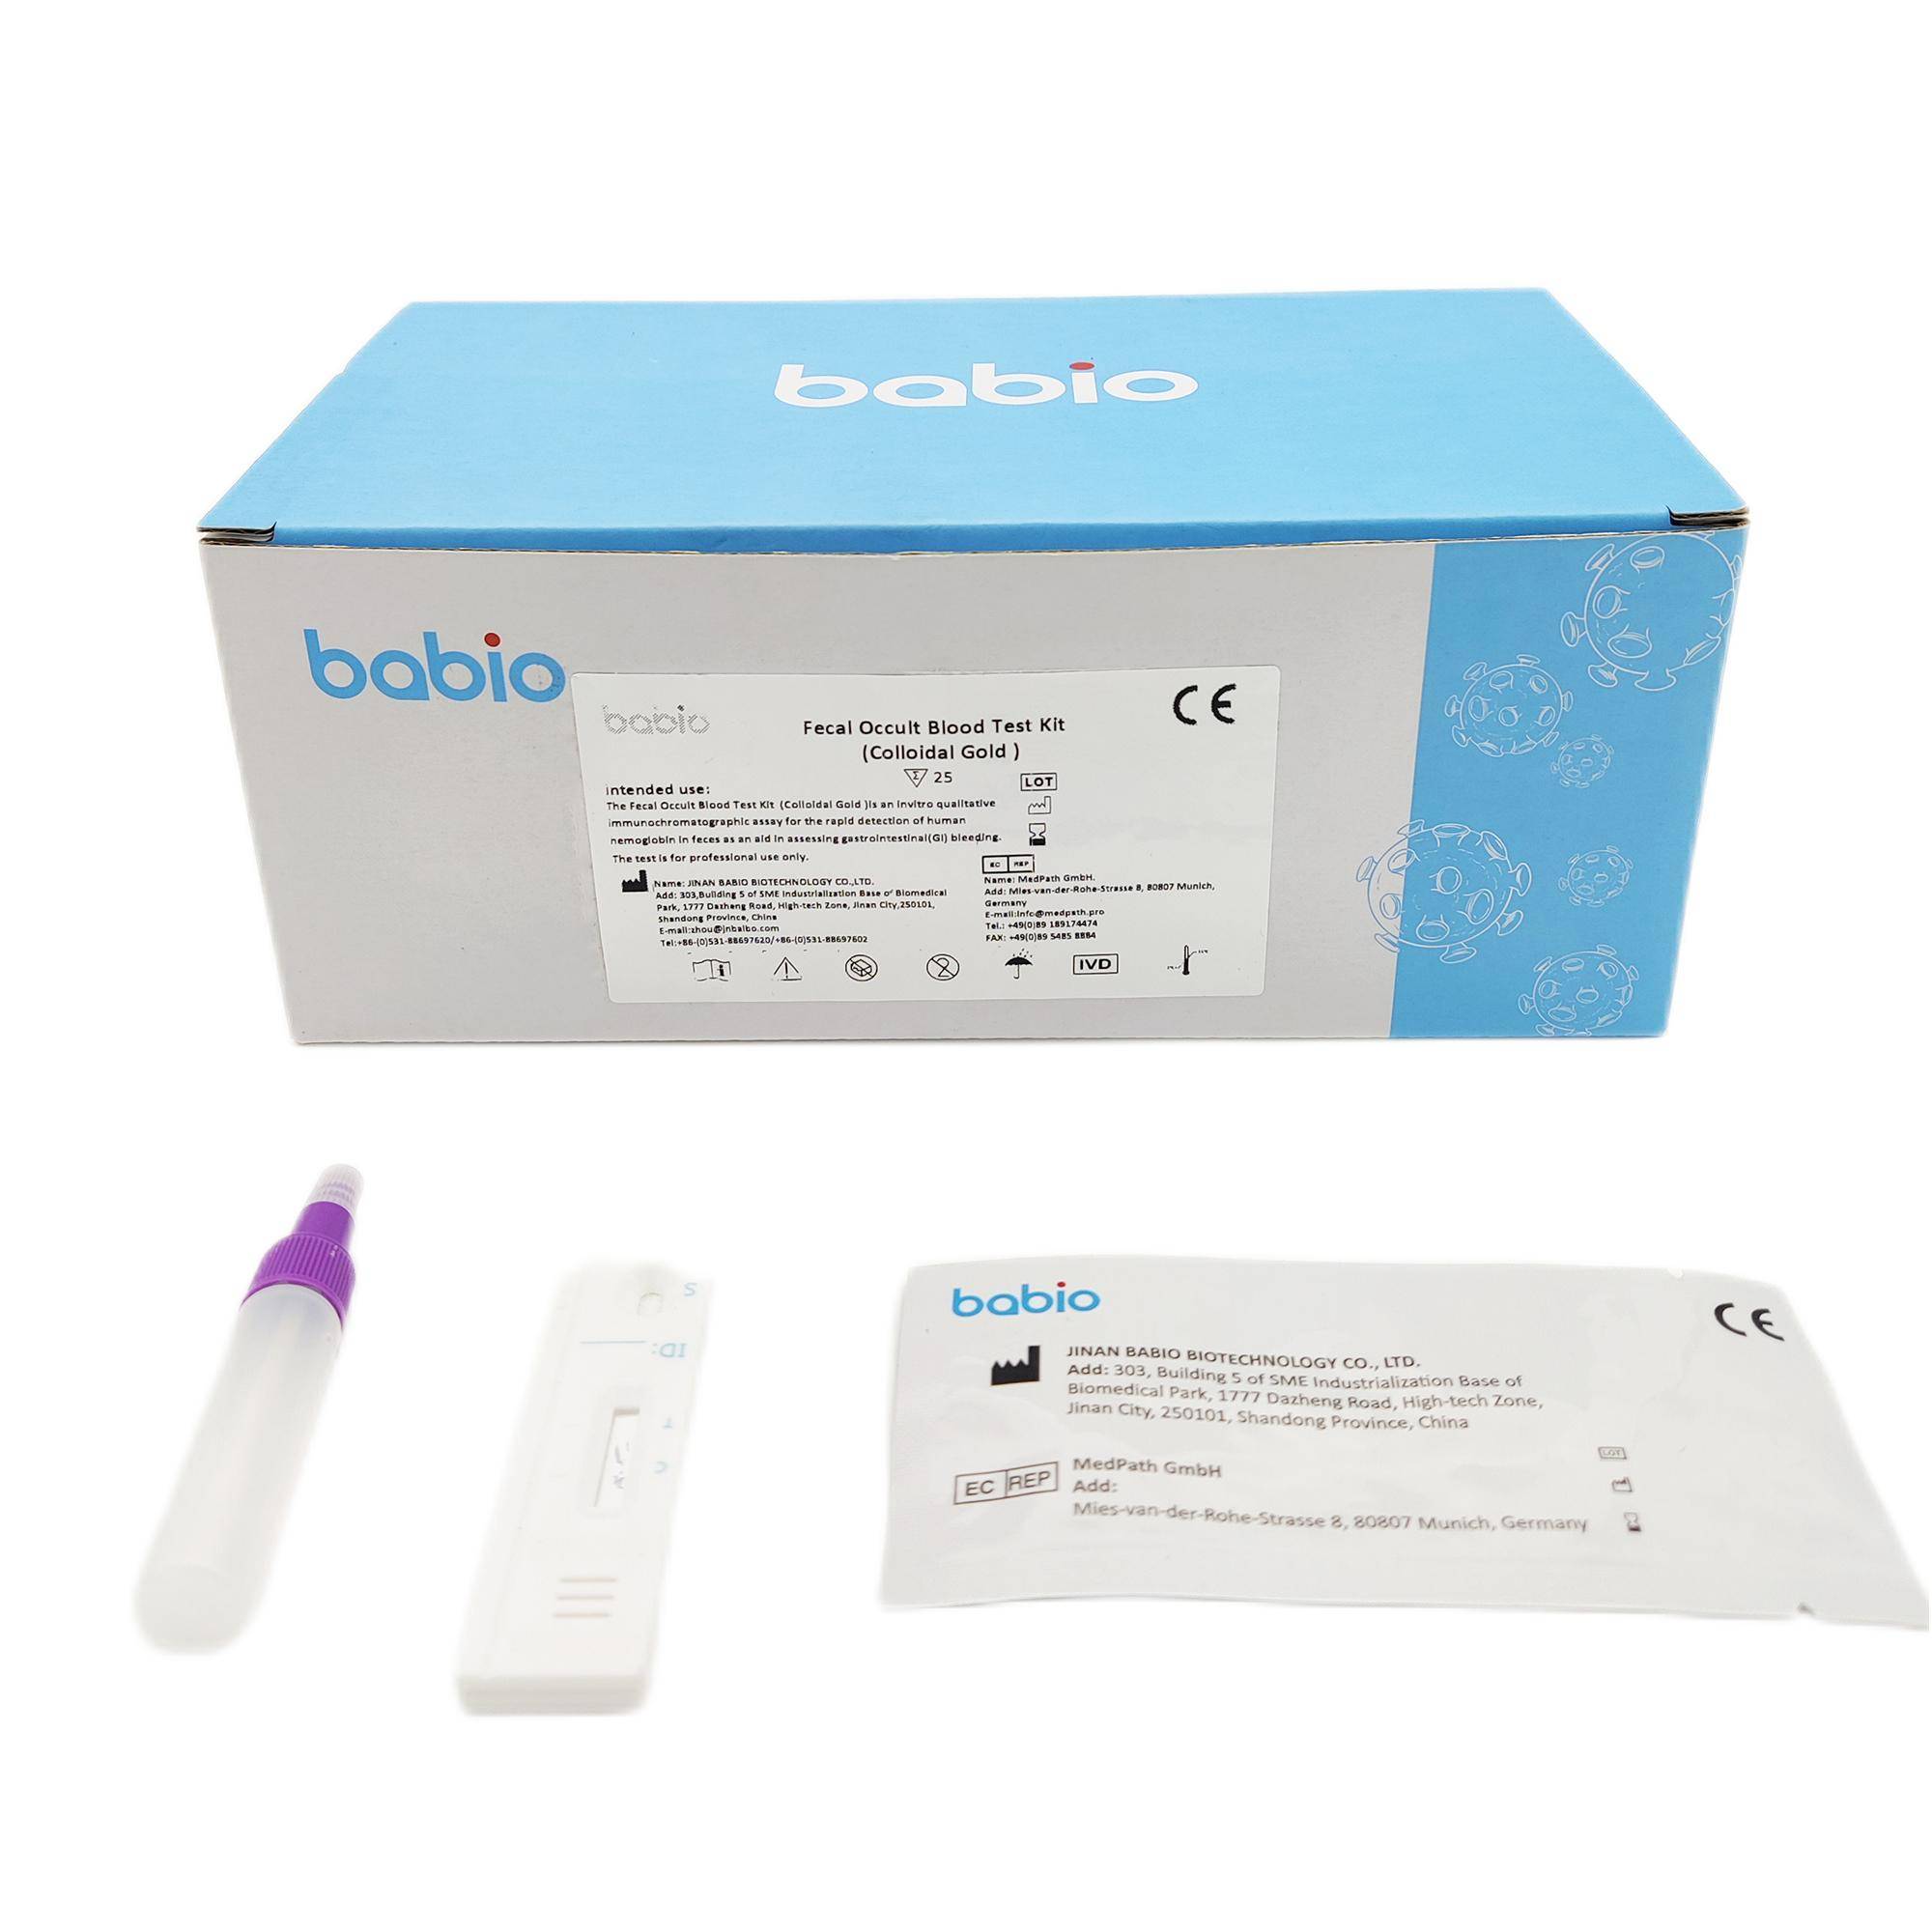 Fecal Occult Blood Test Kit (Colloidal Gold)